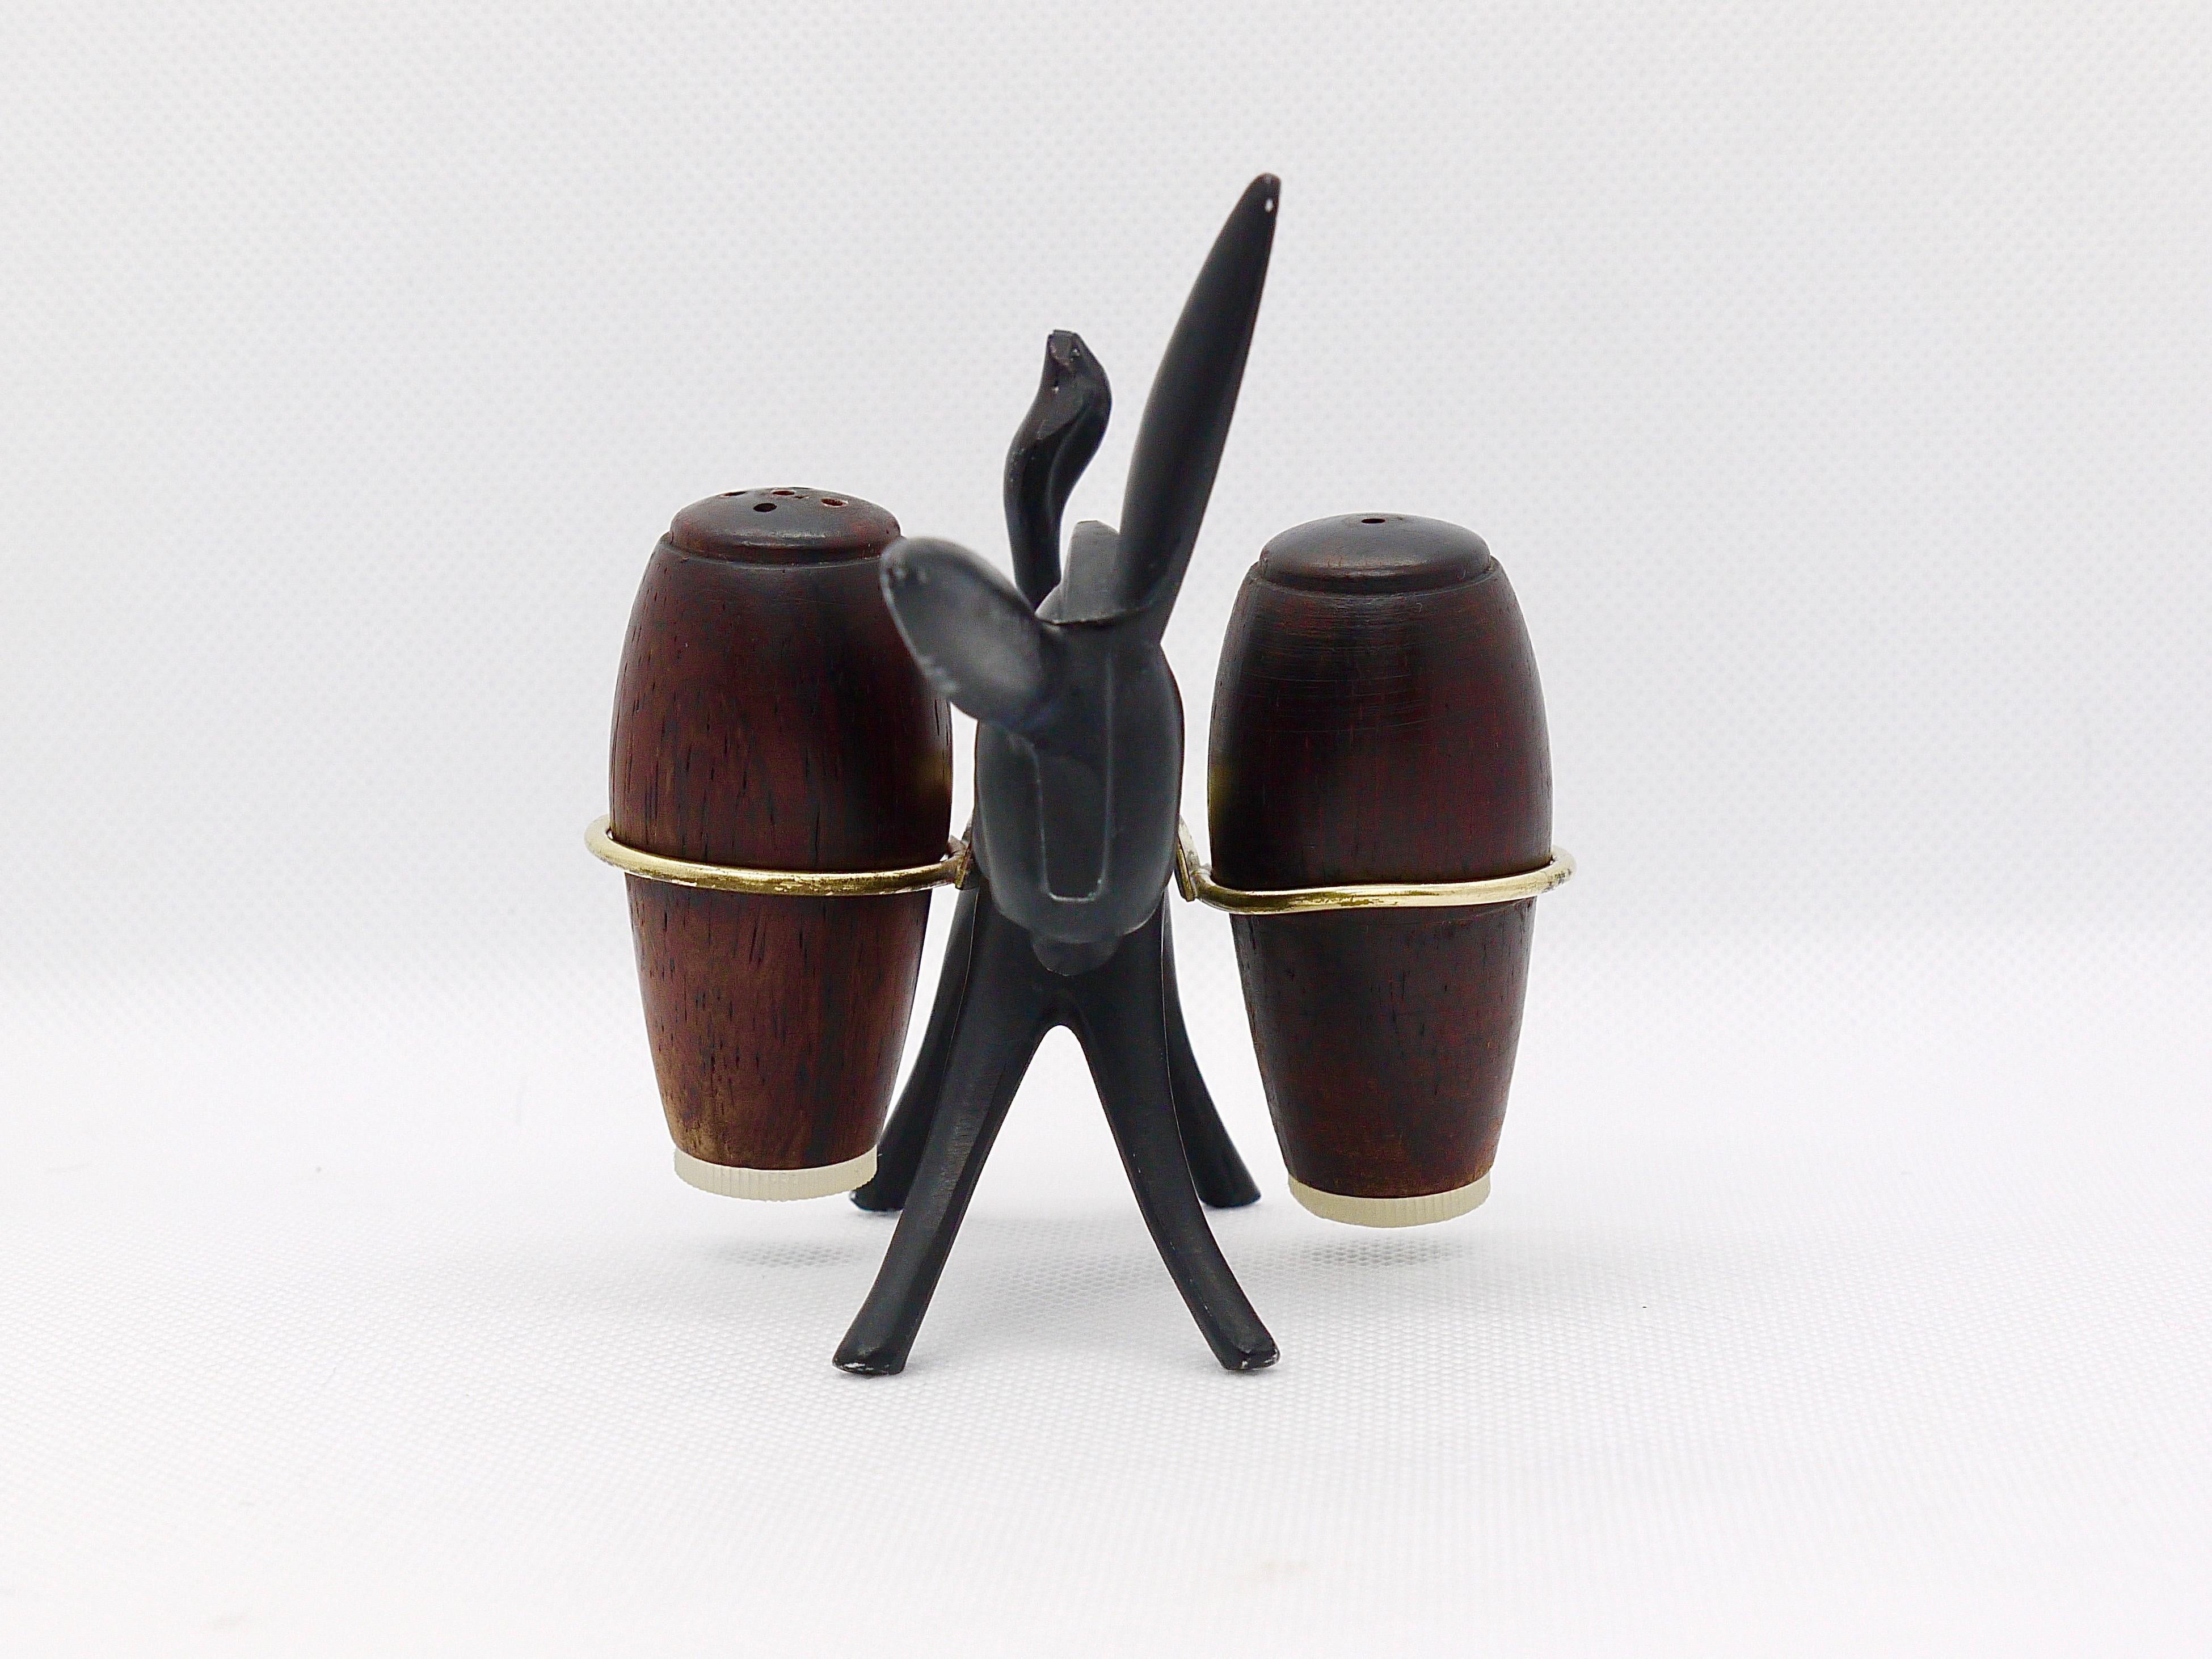 Walter Bosse Donkey Salt and Pepper Shaker Set, Herta Baller, Austria, 1950s In Good Condition For Sale In Vienna, AT